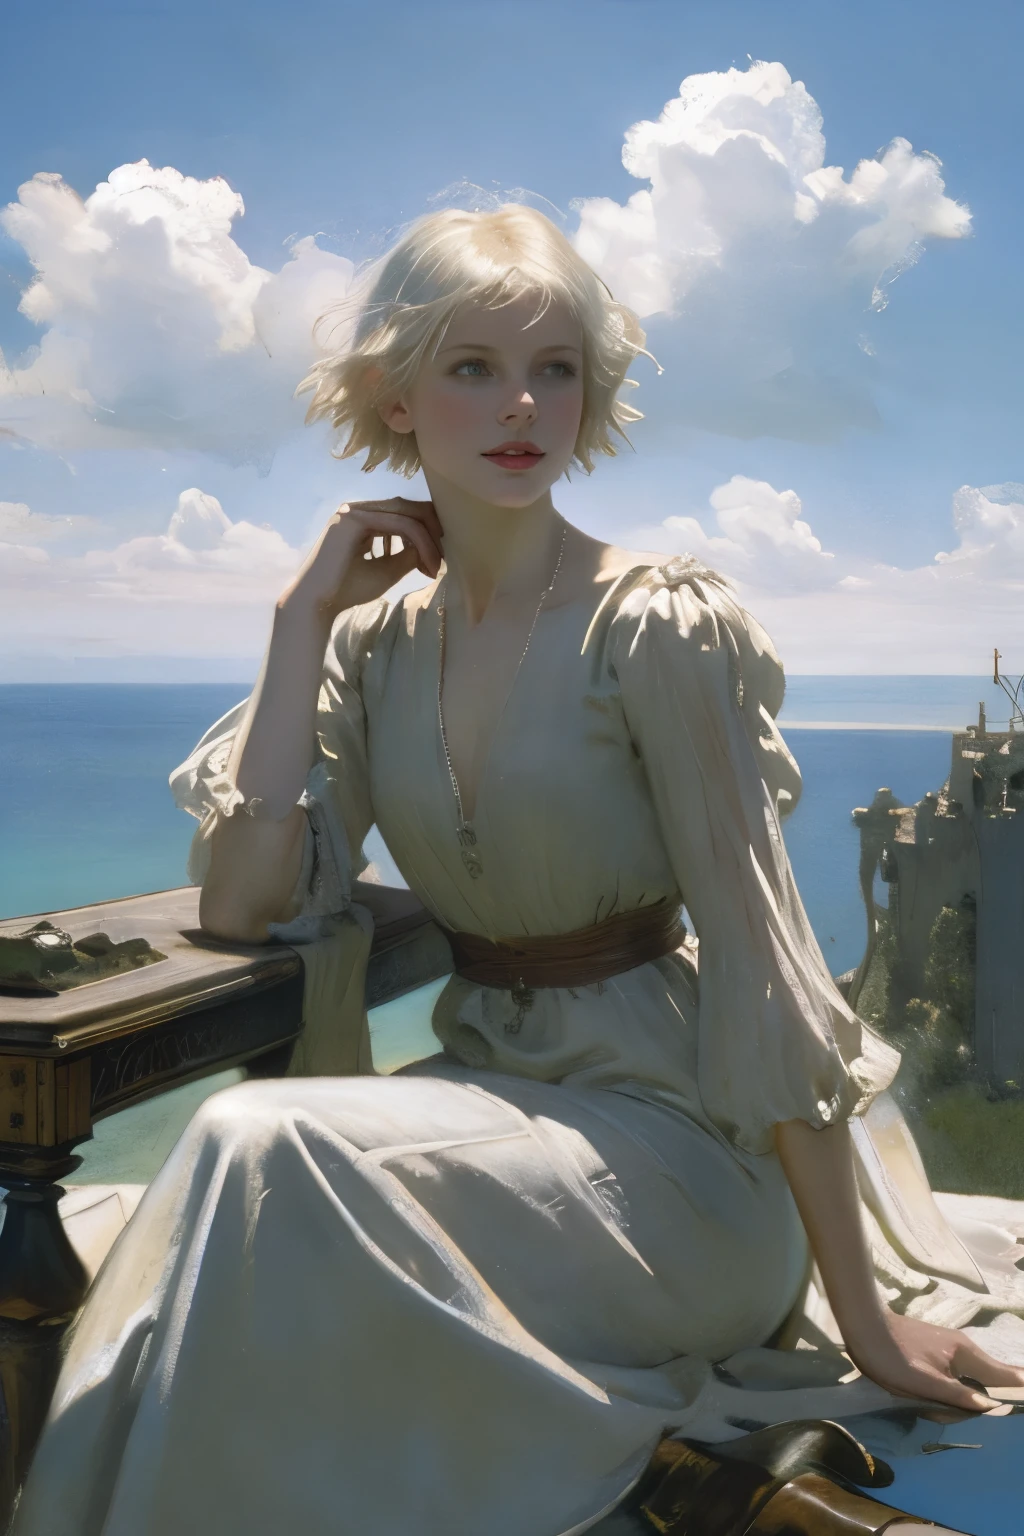 Top quality image, masterpiece, digital illustration, Mark Simonetti style, Howard Lyon, Arthur Rackham, aerial perspective, rule of thirds, beautiful Girl, pretty face, light make-up, platinum blonde short hair, sitting on, cumulus clouds, oilpainting